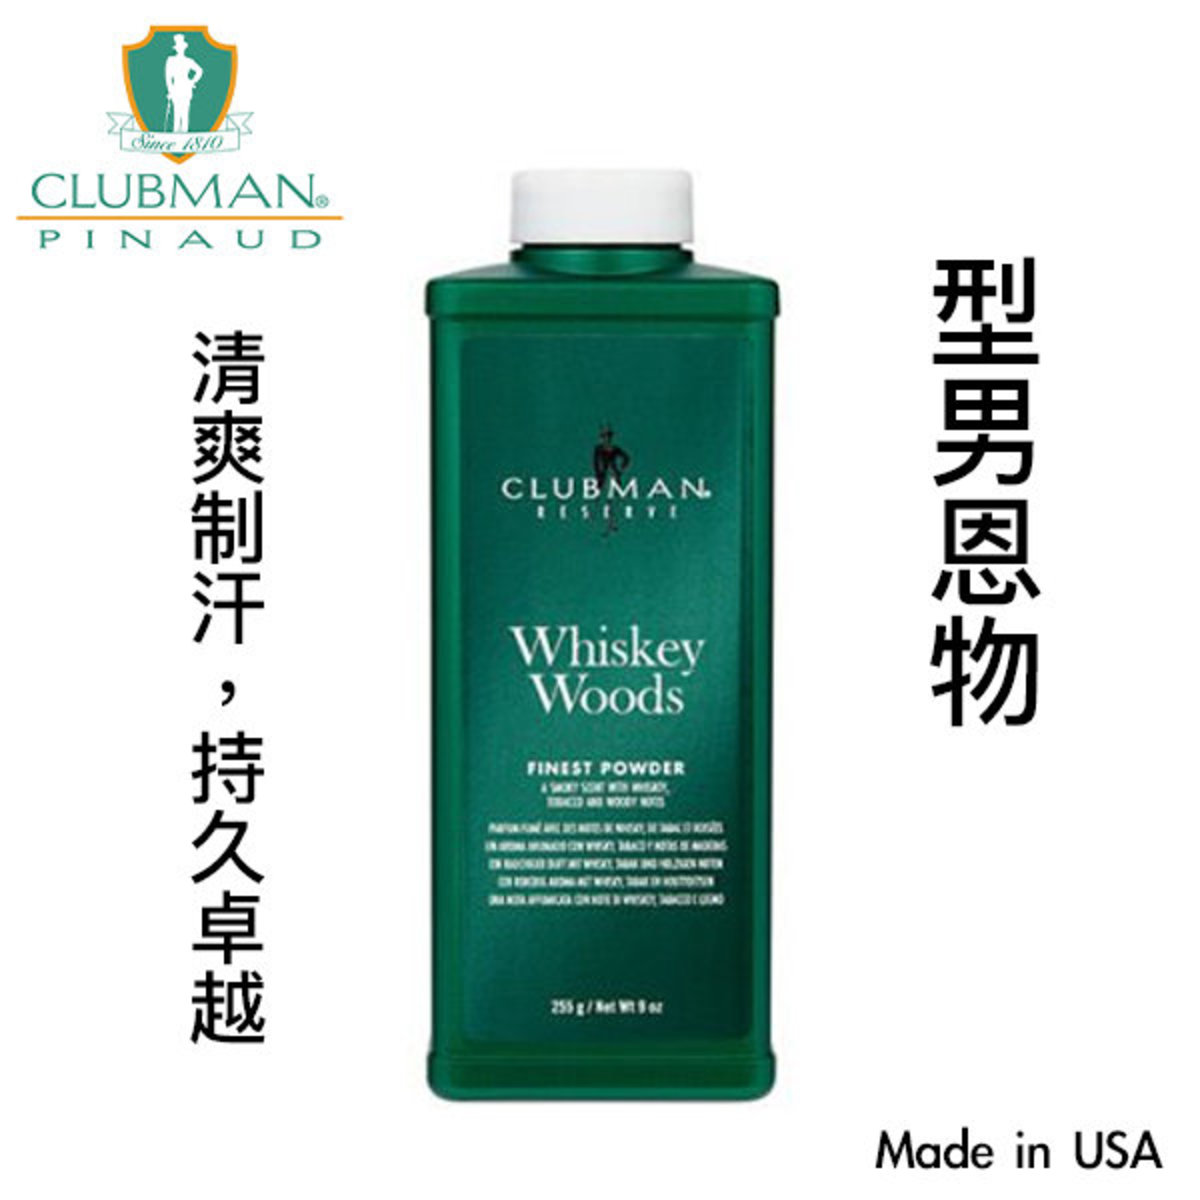 clubman styling gel by ed pinaud for men